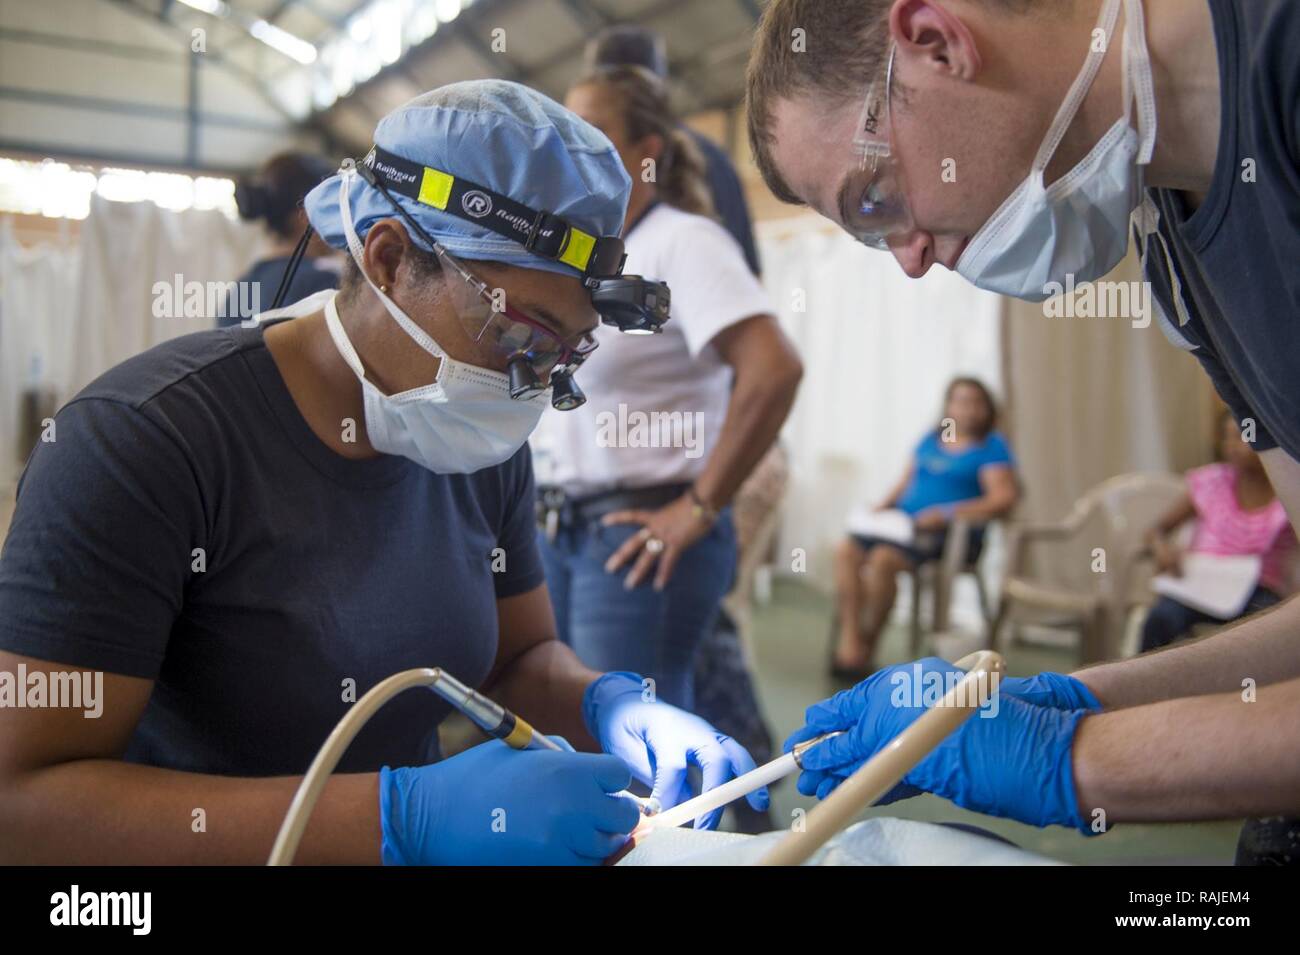 (Feb. 3, 2017) PUERTO BARRIOS - Lt. Charlie Cage, a native of Jacksonville, Fla., attached to Naval Hospital Jacksonville (left), and Hospitalman Lucas Guinon, a native of Valeo, Calif., perform dental work on a host nation patient at the Continuing Promise 2017 (CP-17) medical site in Puerto Barrios, Guatemala. CP-17 is a U.S. Southern Command-sponsored and U.S. Naval Forces Southern Command/U.S. 4th Fleet-conducted deployment to conduct civil-military operations including humanitarian assistance, training engagements, and medical, dental, and veterinary support in an effort to show U.S. supp Stock Photo